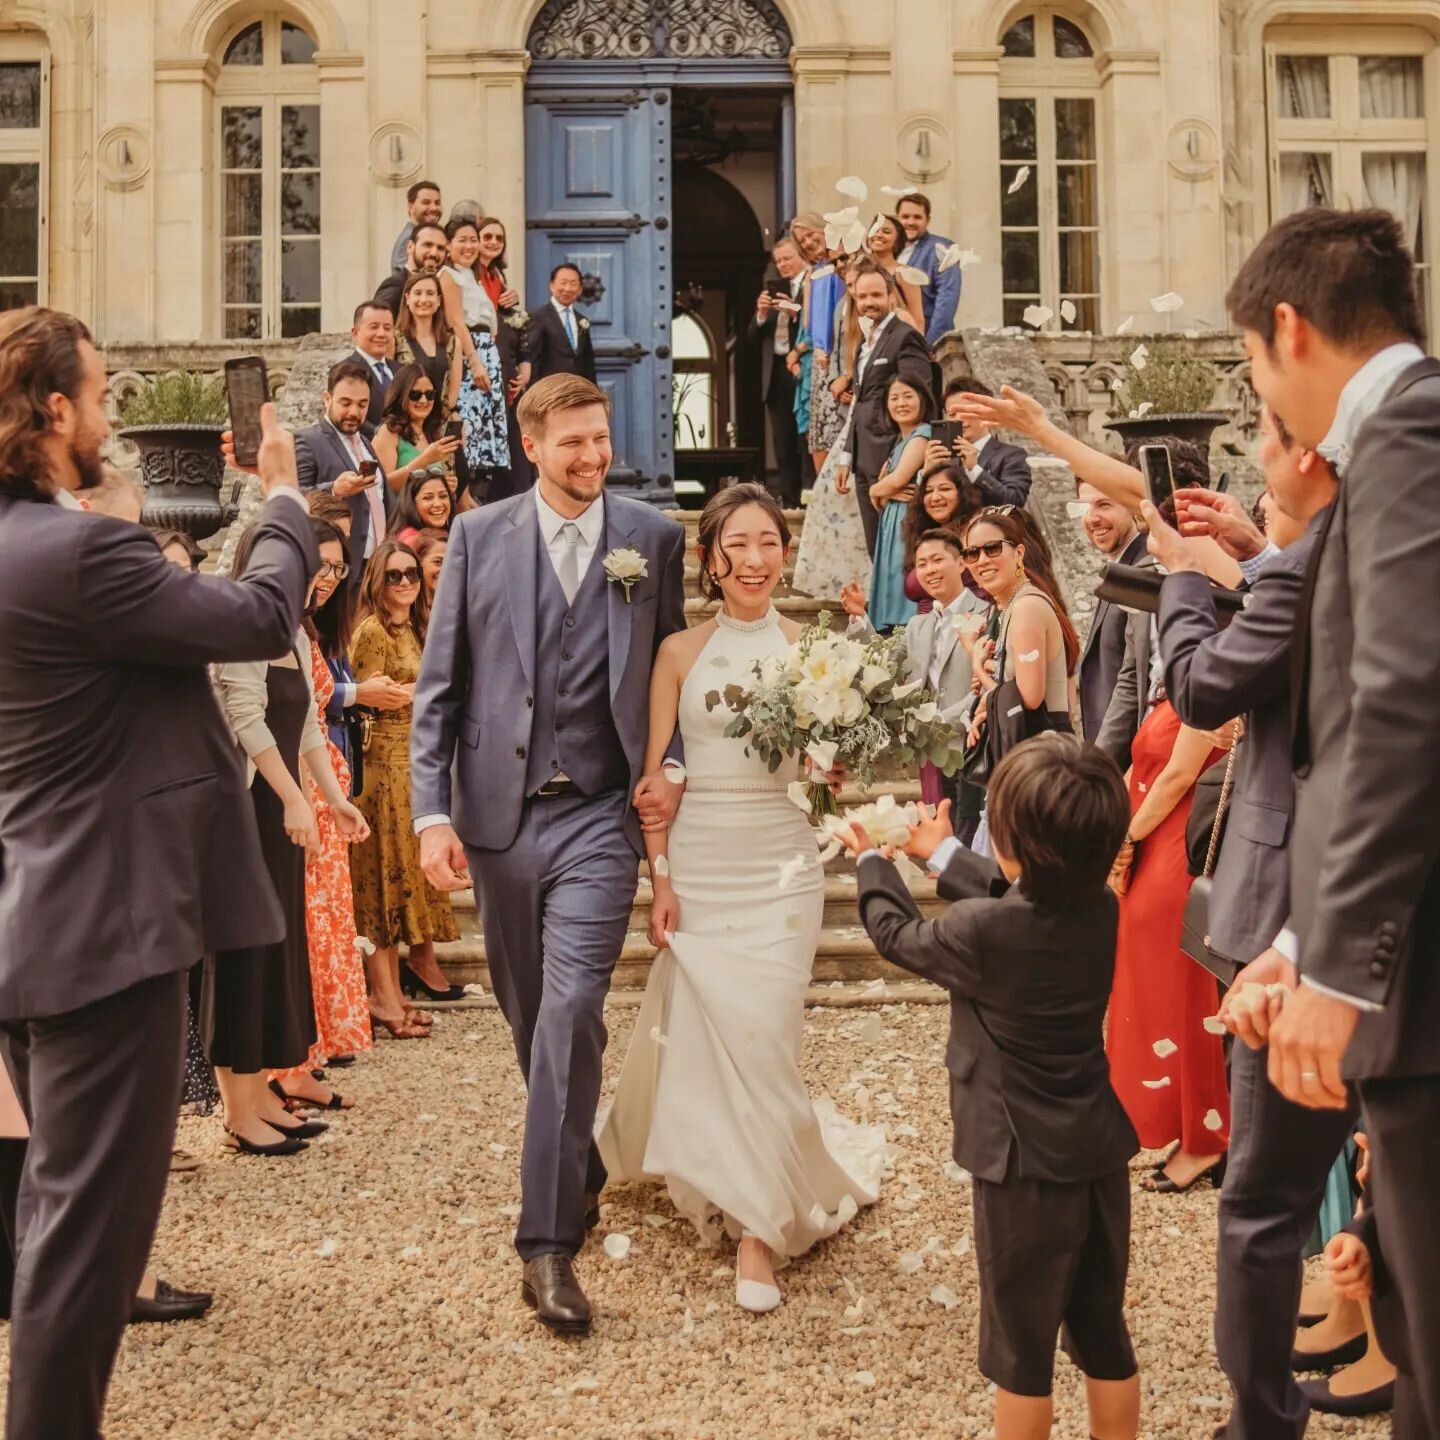 Now that the 2023 wedding season is over, it's time for a recap, starting with this year's first wedding, Chiho and Spencer at @chateaudelavalouze

Venue - @chateaudelavalouze
Planning - @justine.weddings @marrymeinfrance
@r.wei14
Music/DJ/Sax-@mixol